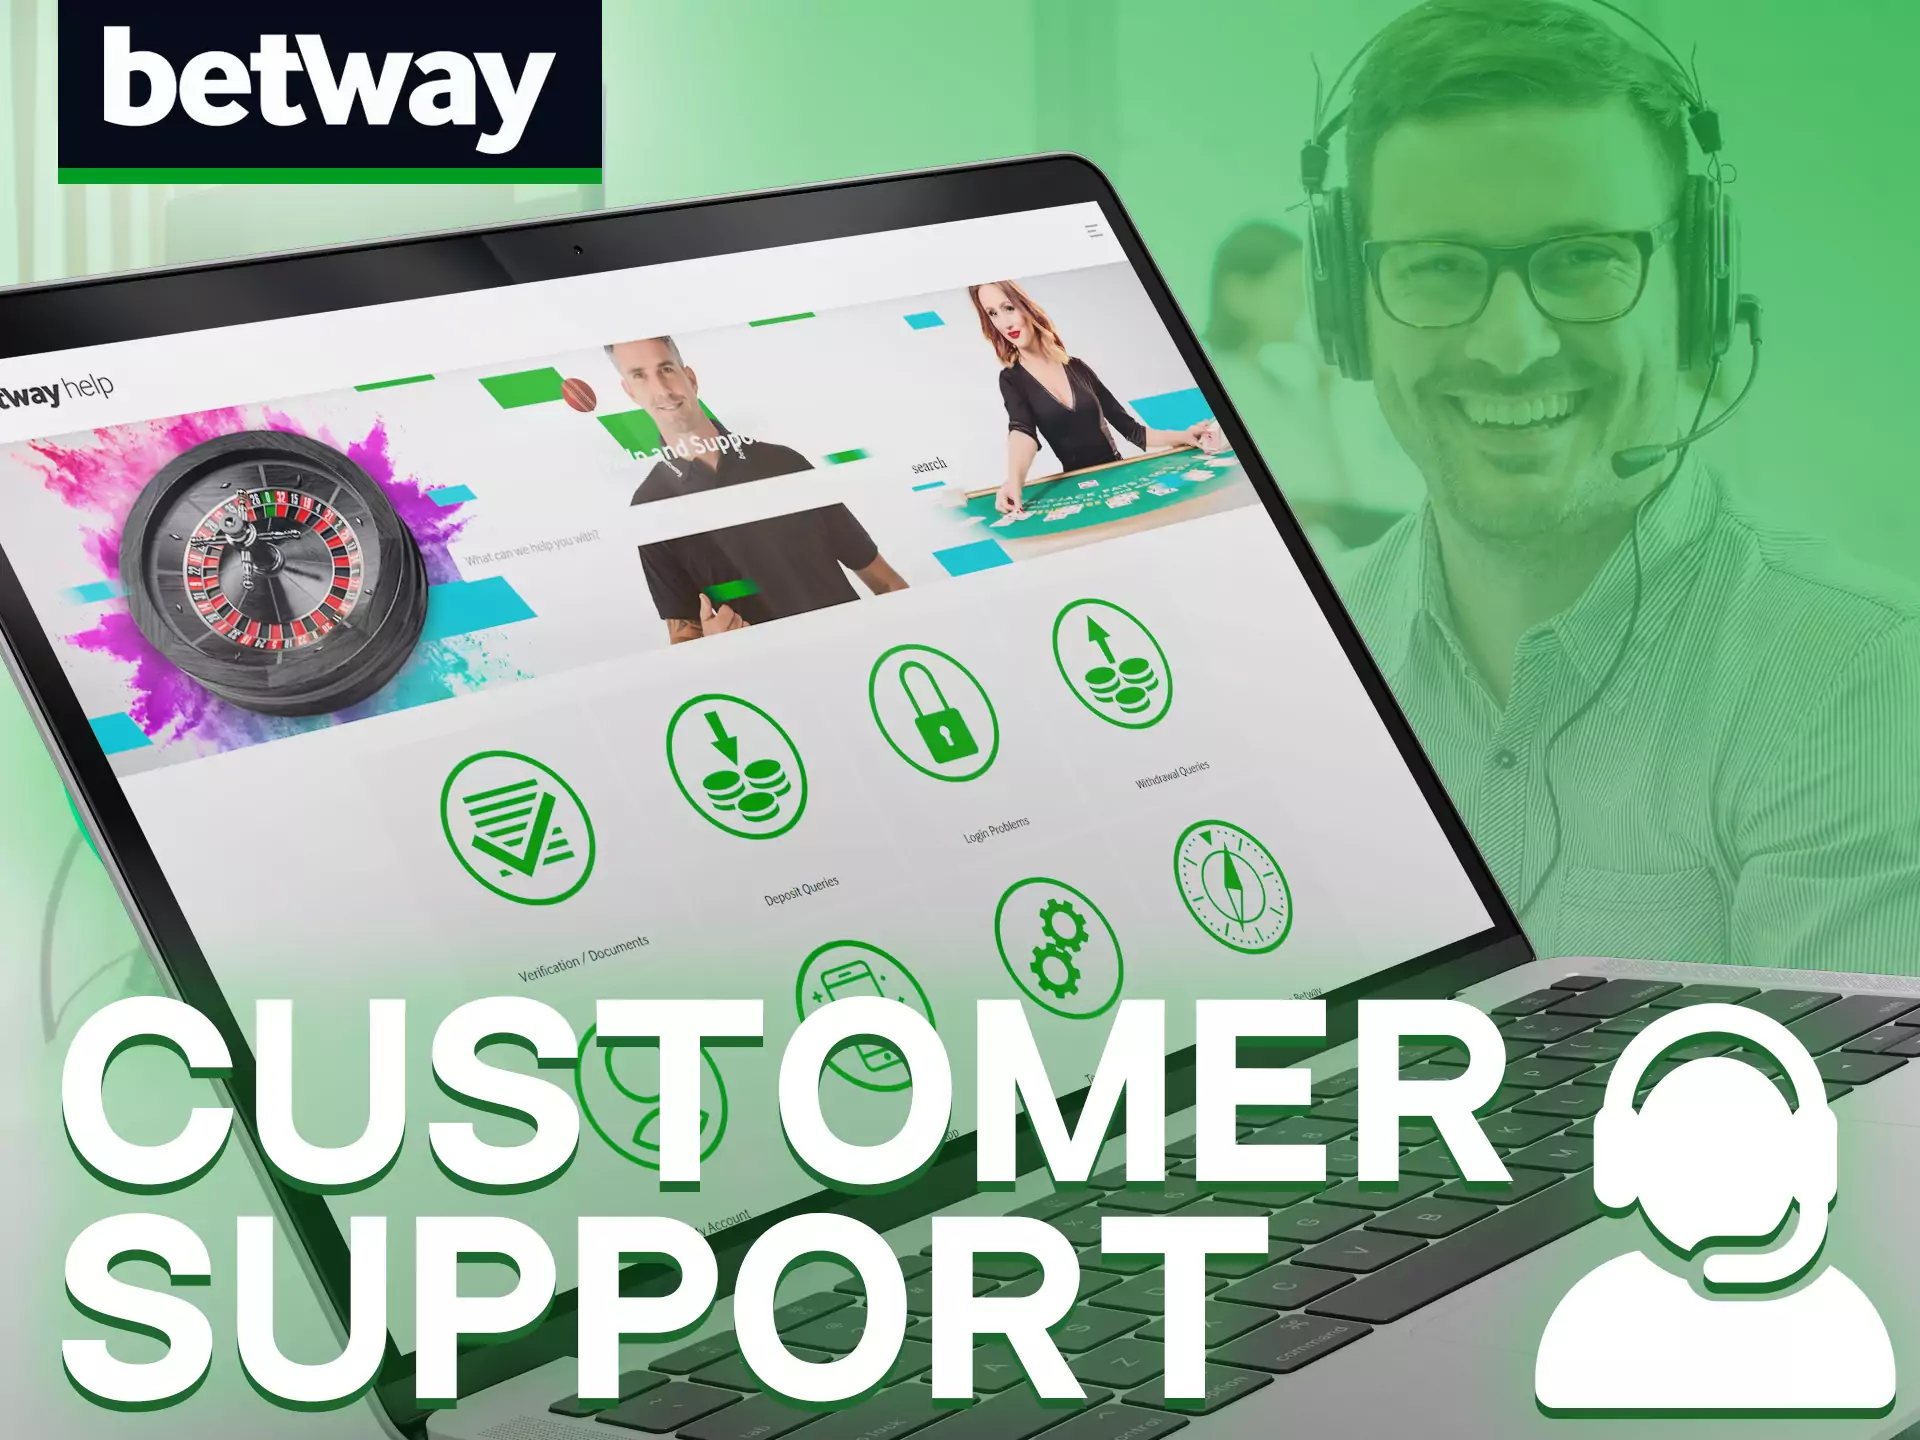 Ask any question to Betway support.